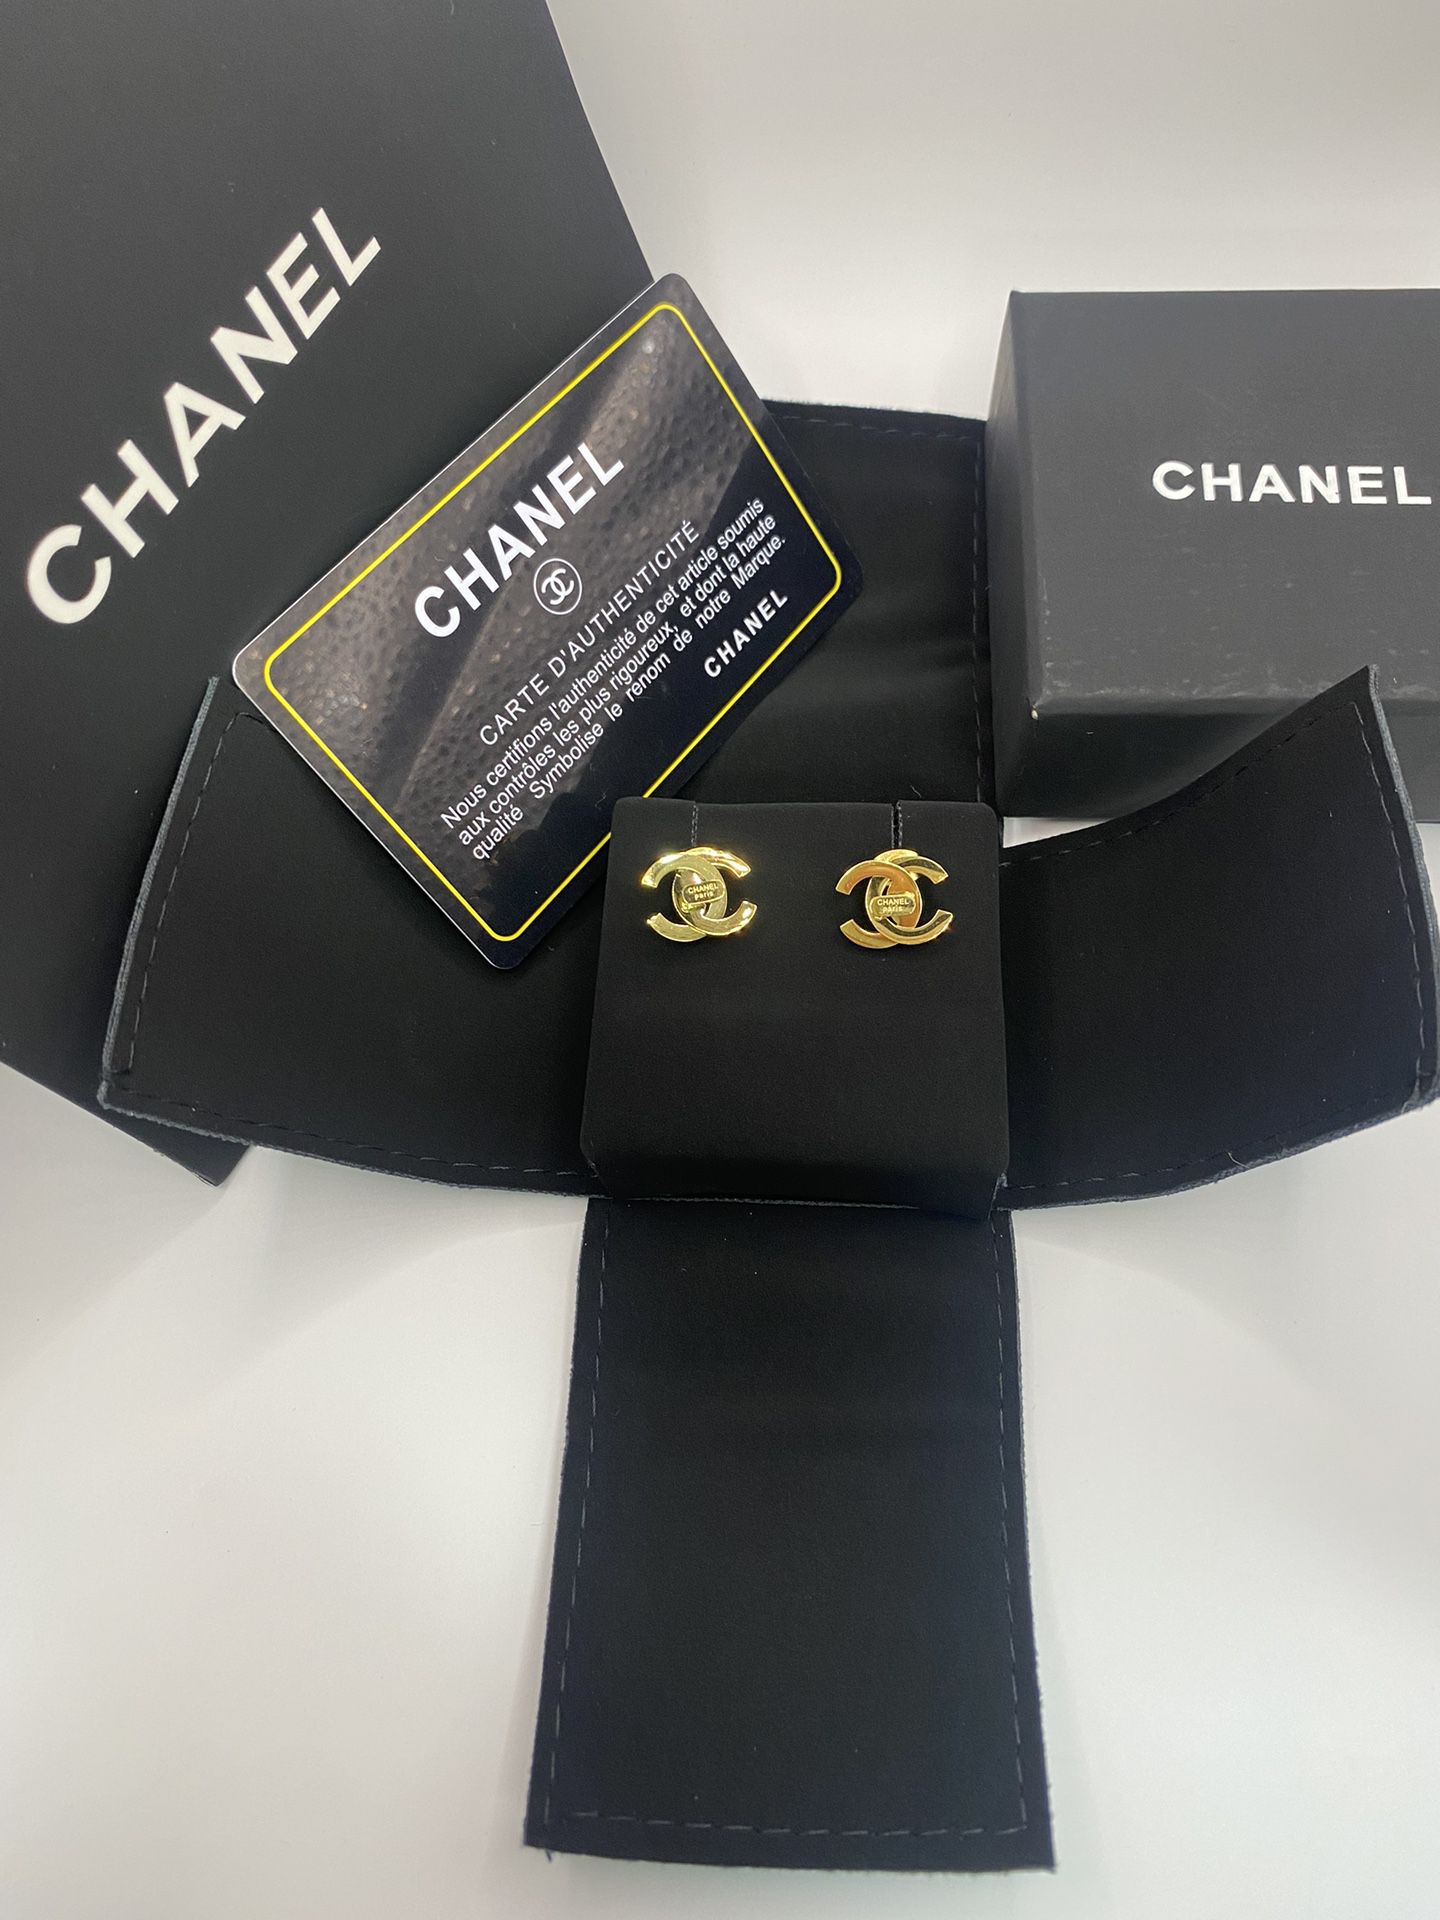 Authentic Vintage Chanel Stud Earrings Gold Color for Sale in Los